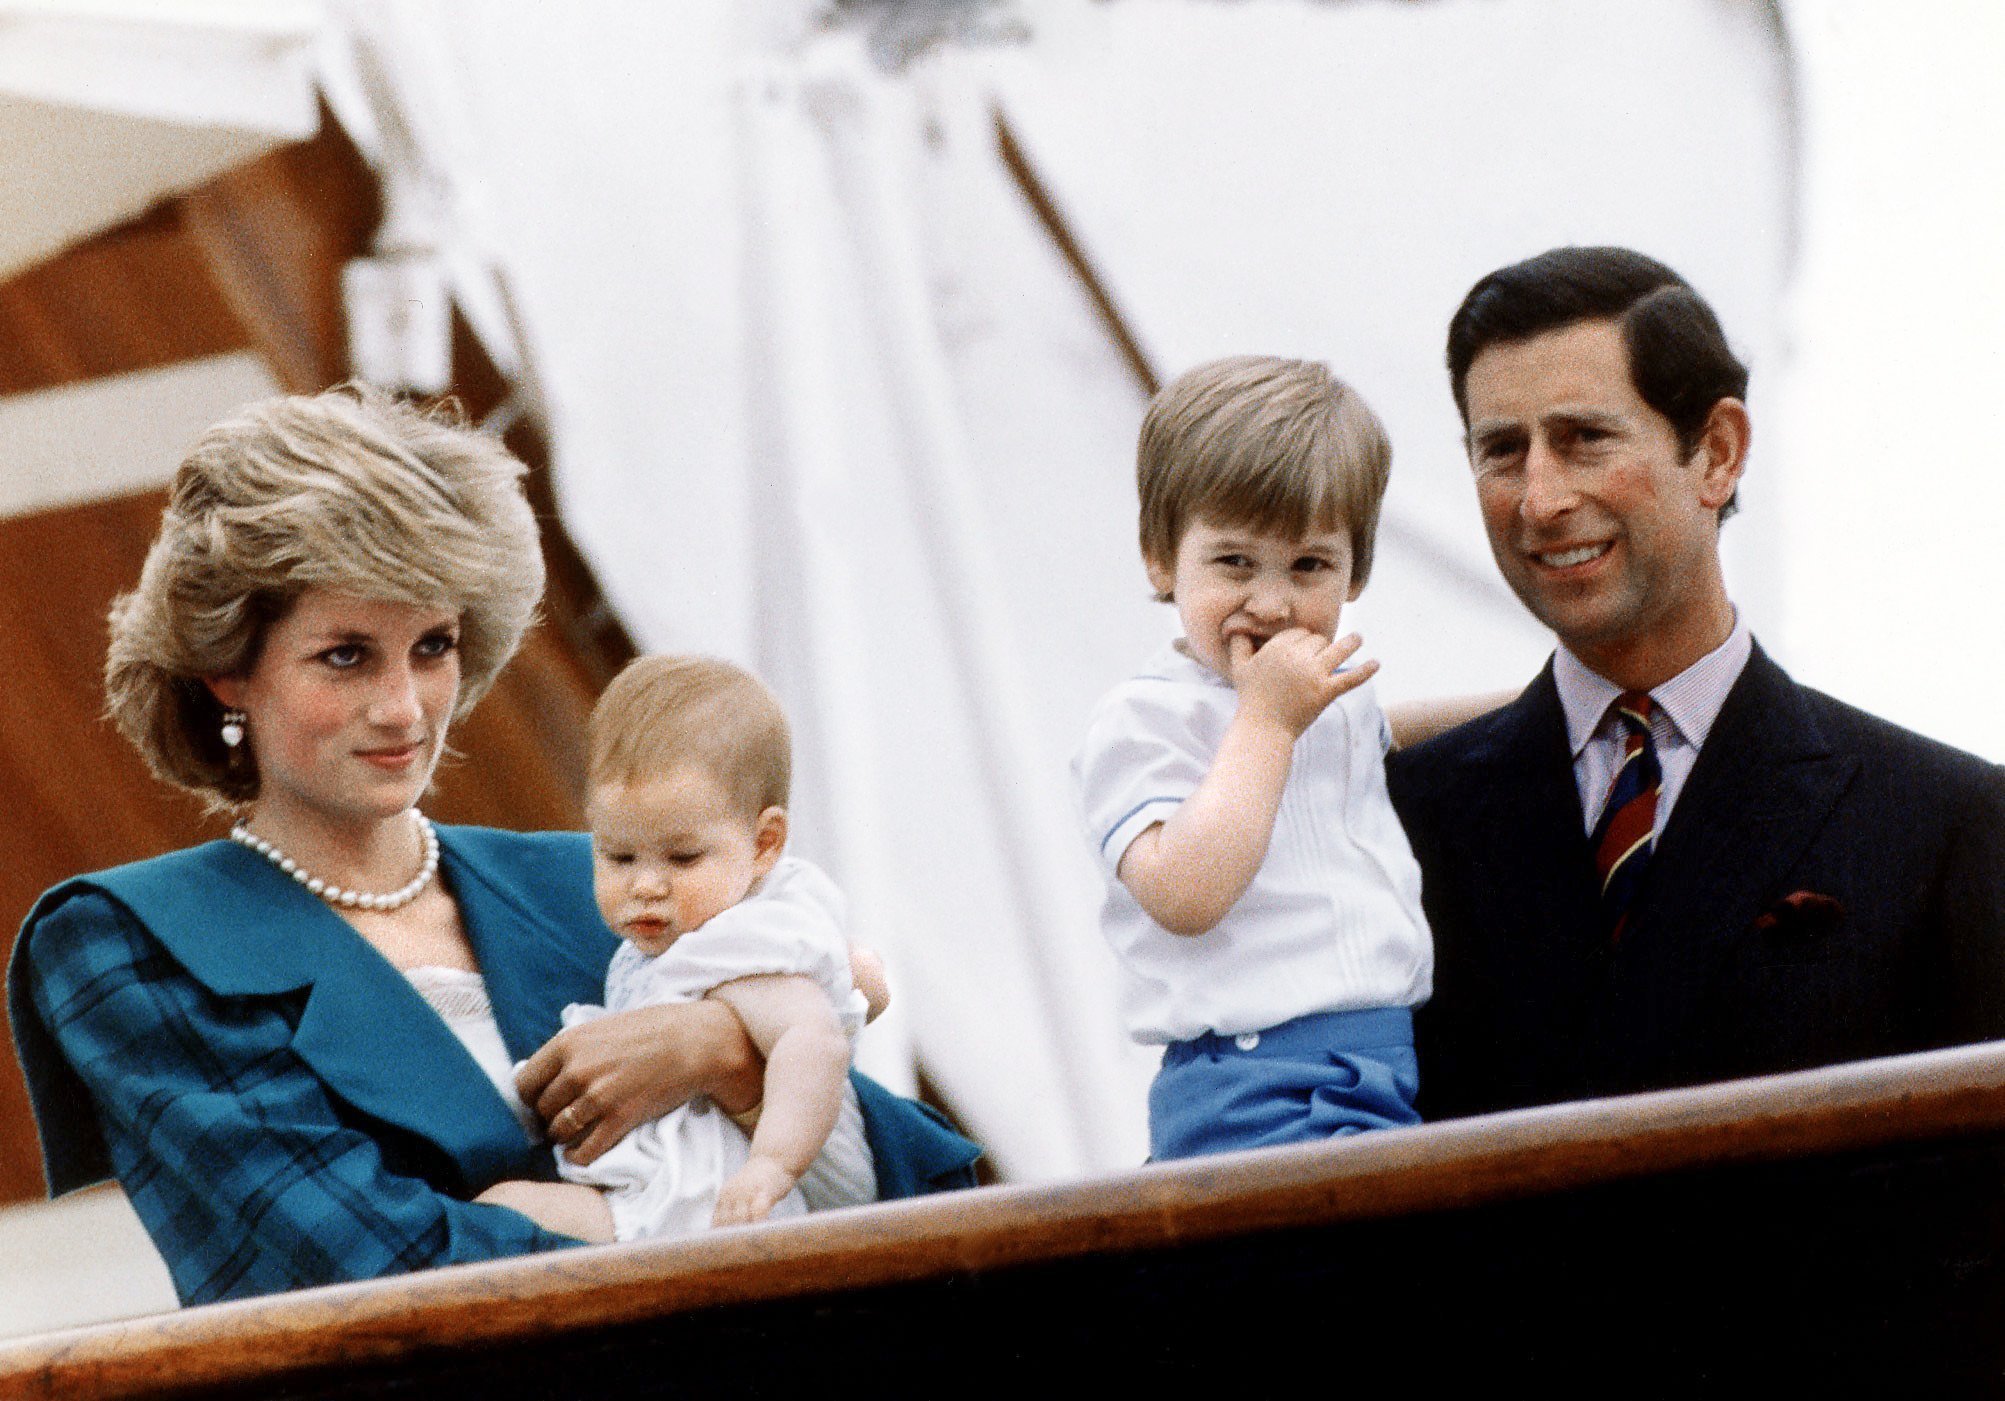 Princess Diana and Prince Charles pose with their sons Princes Harry and William on board royal yacht Britannia during their visit to Venice, Italy, 6th May 1985 | Photo: Getty Images